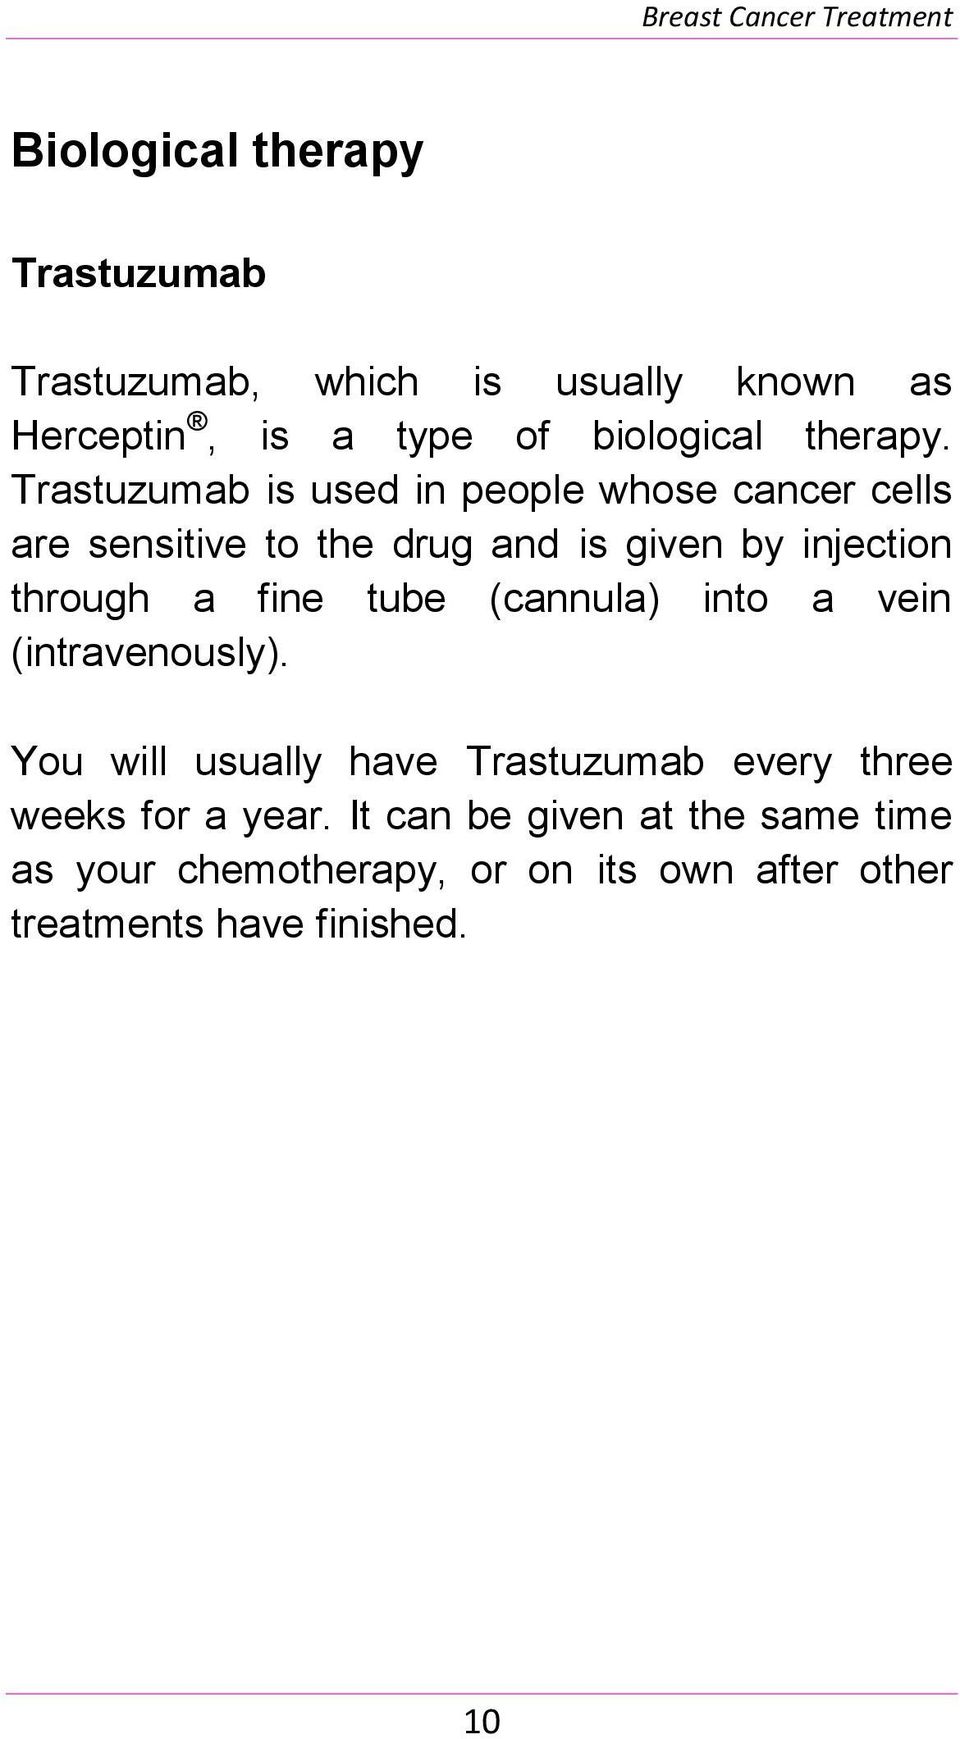 Trastuzumab is used in people whose cancer cells are sensitive to the drug and is given by injection through a